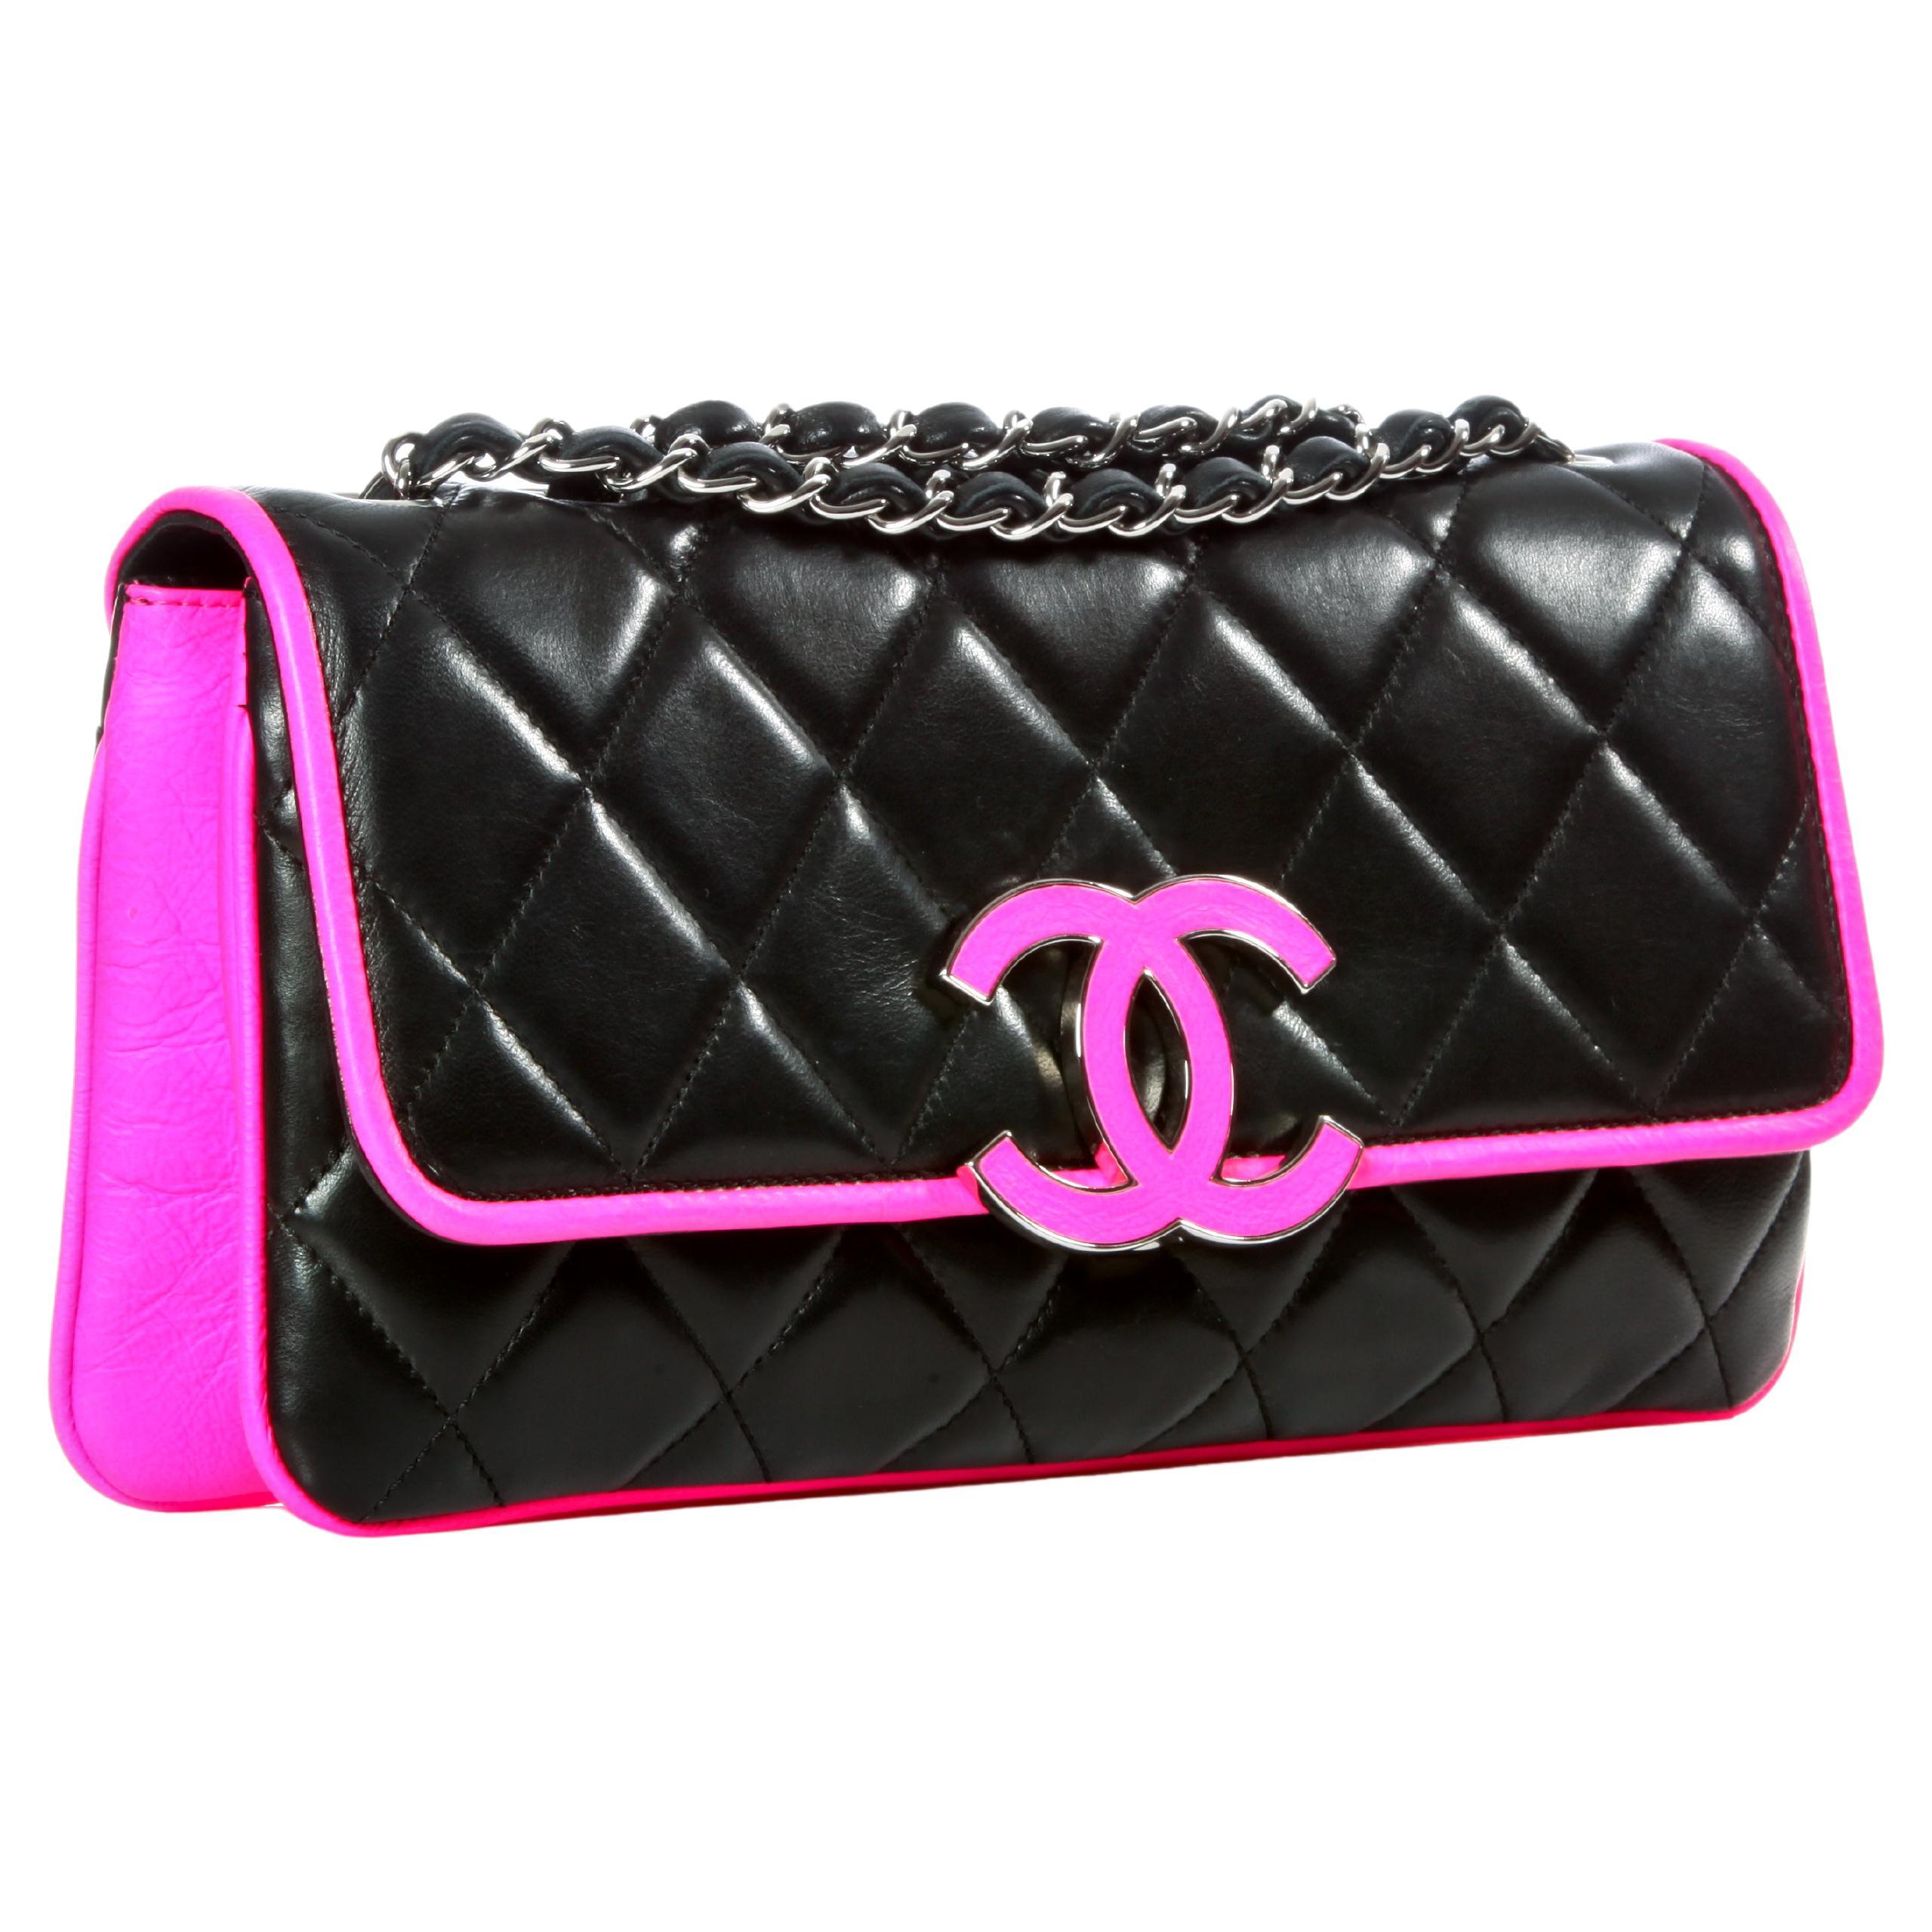 Chanel 2008 Cruise Black Pink Small Medium Logo Accordion Classic Flap Bag  In Good Condition For Sale In Miami, FL